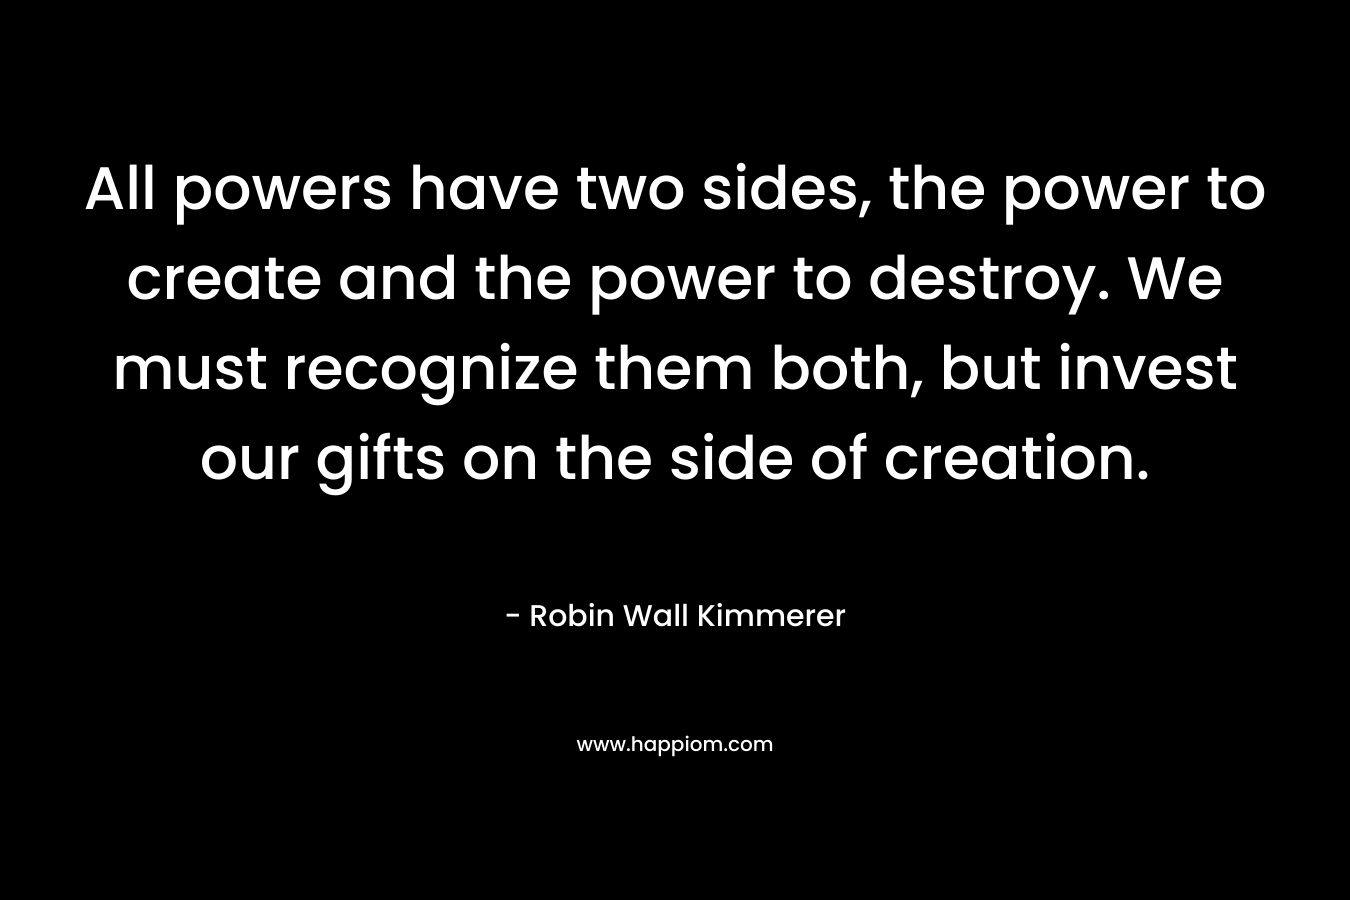 All powers have two sides, the power to create and the power to destroy. We must recognize them both, but invest our gifts on the side of creation. – Robin Wall Kimmerer